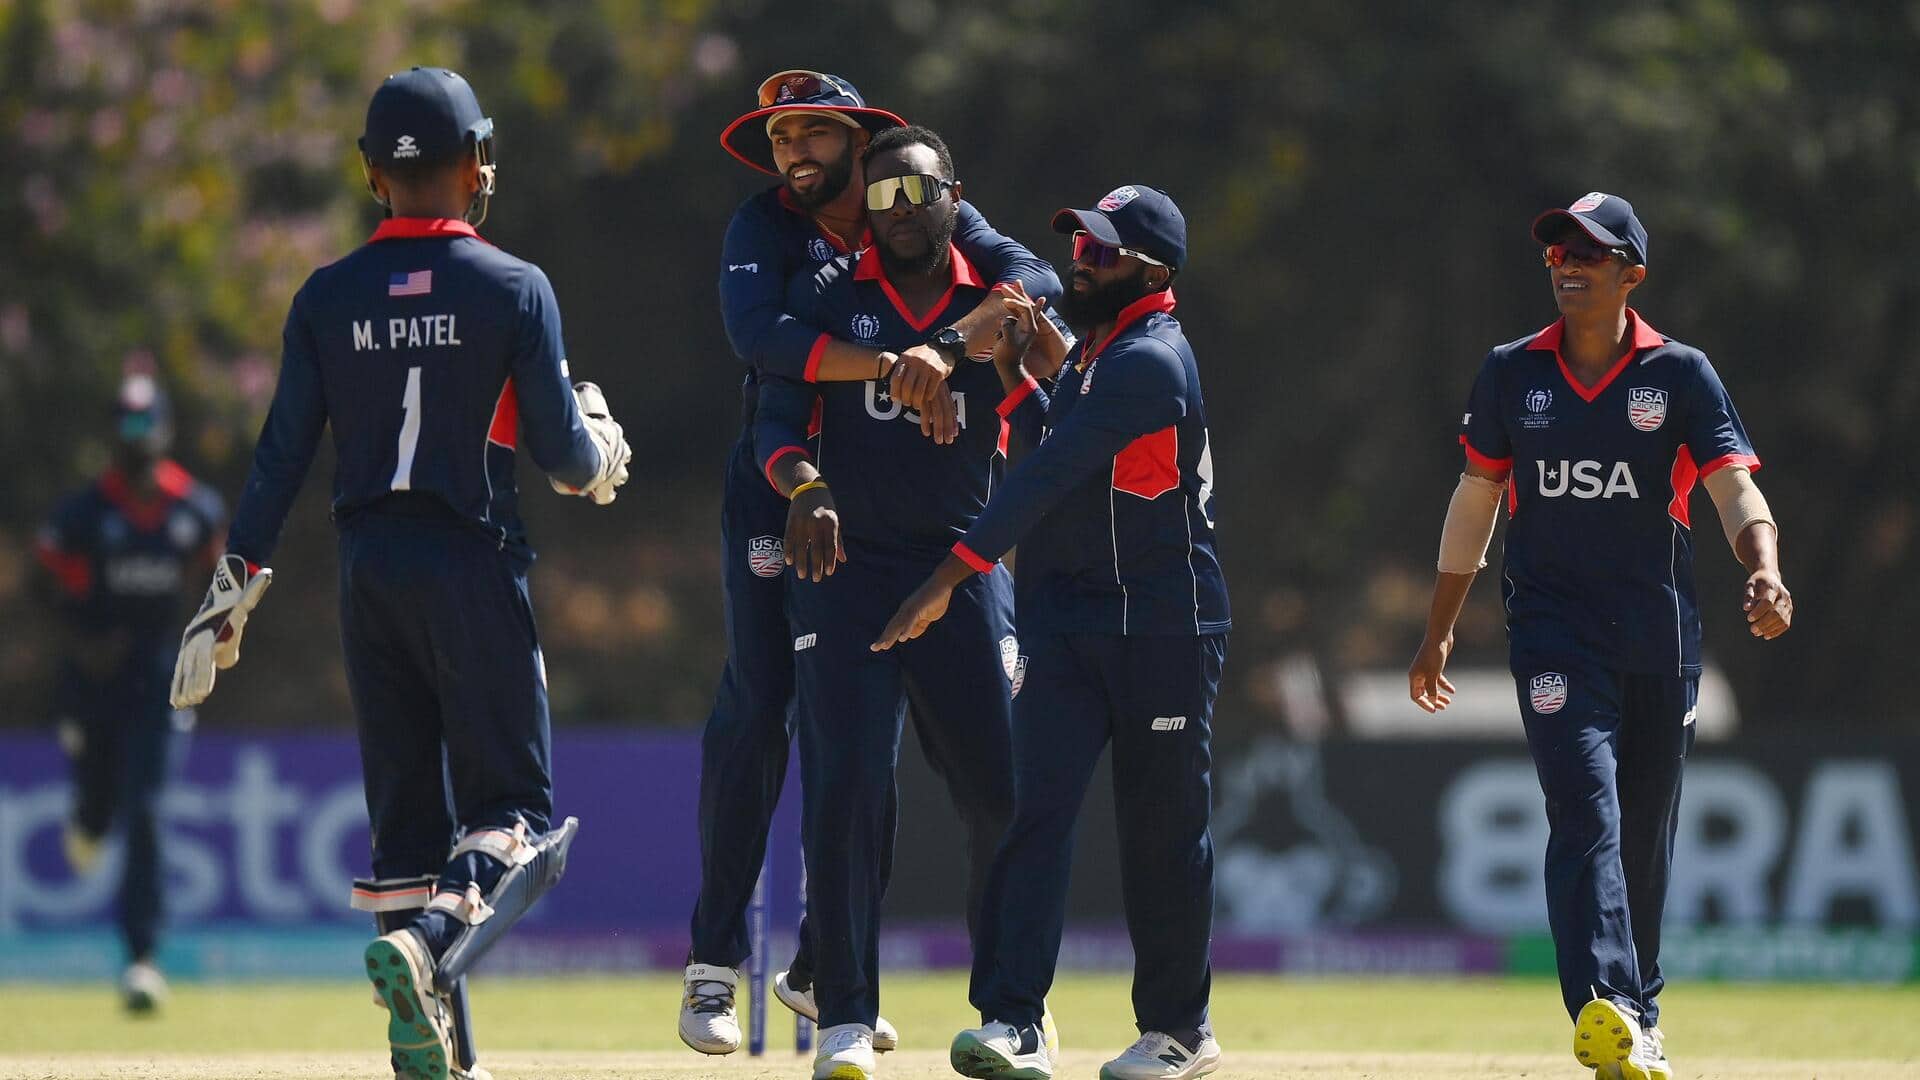 Decoding the rise of USA cricket team in recent years